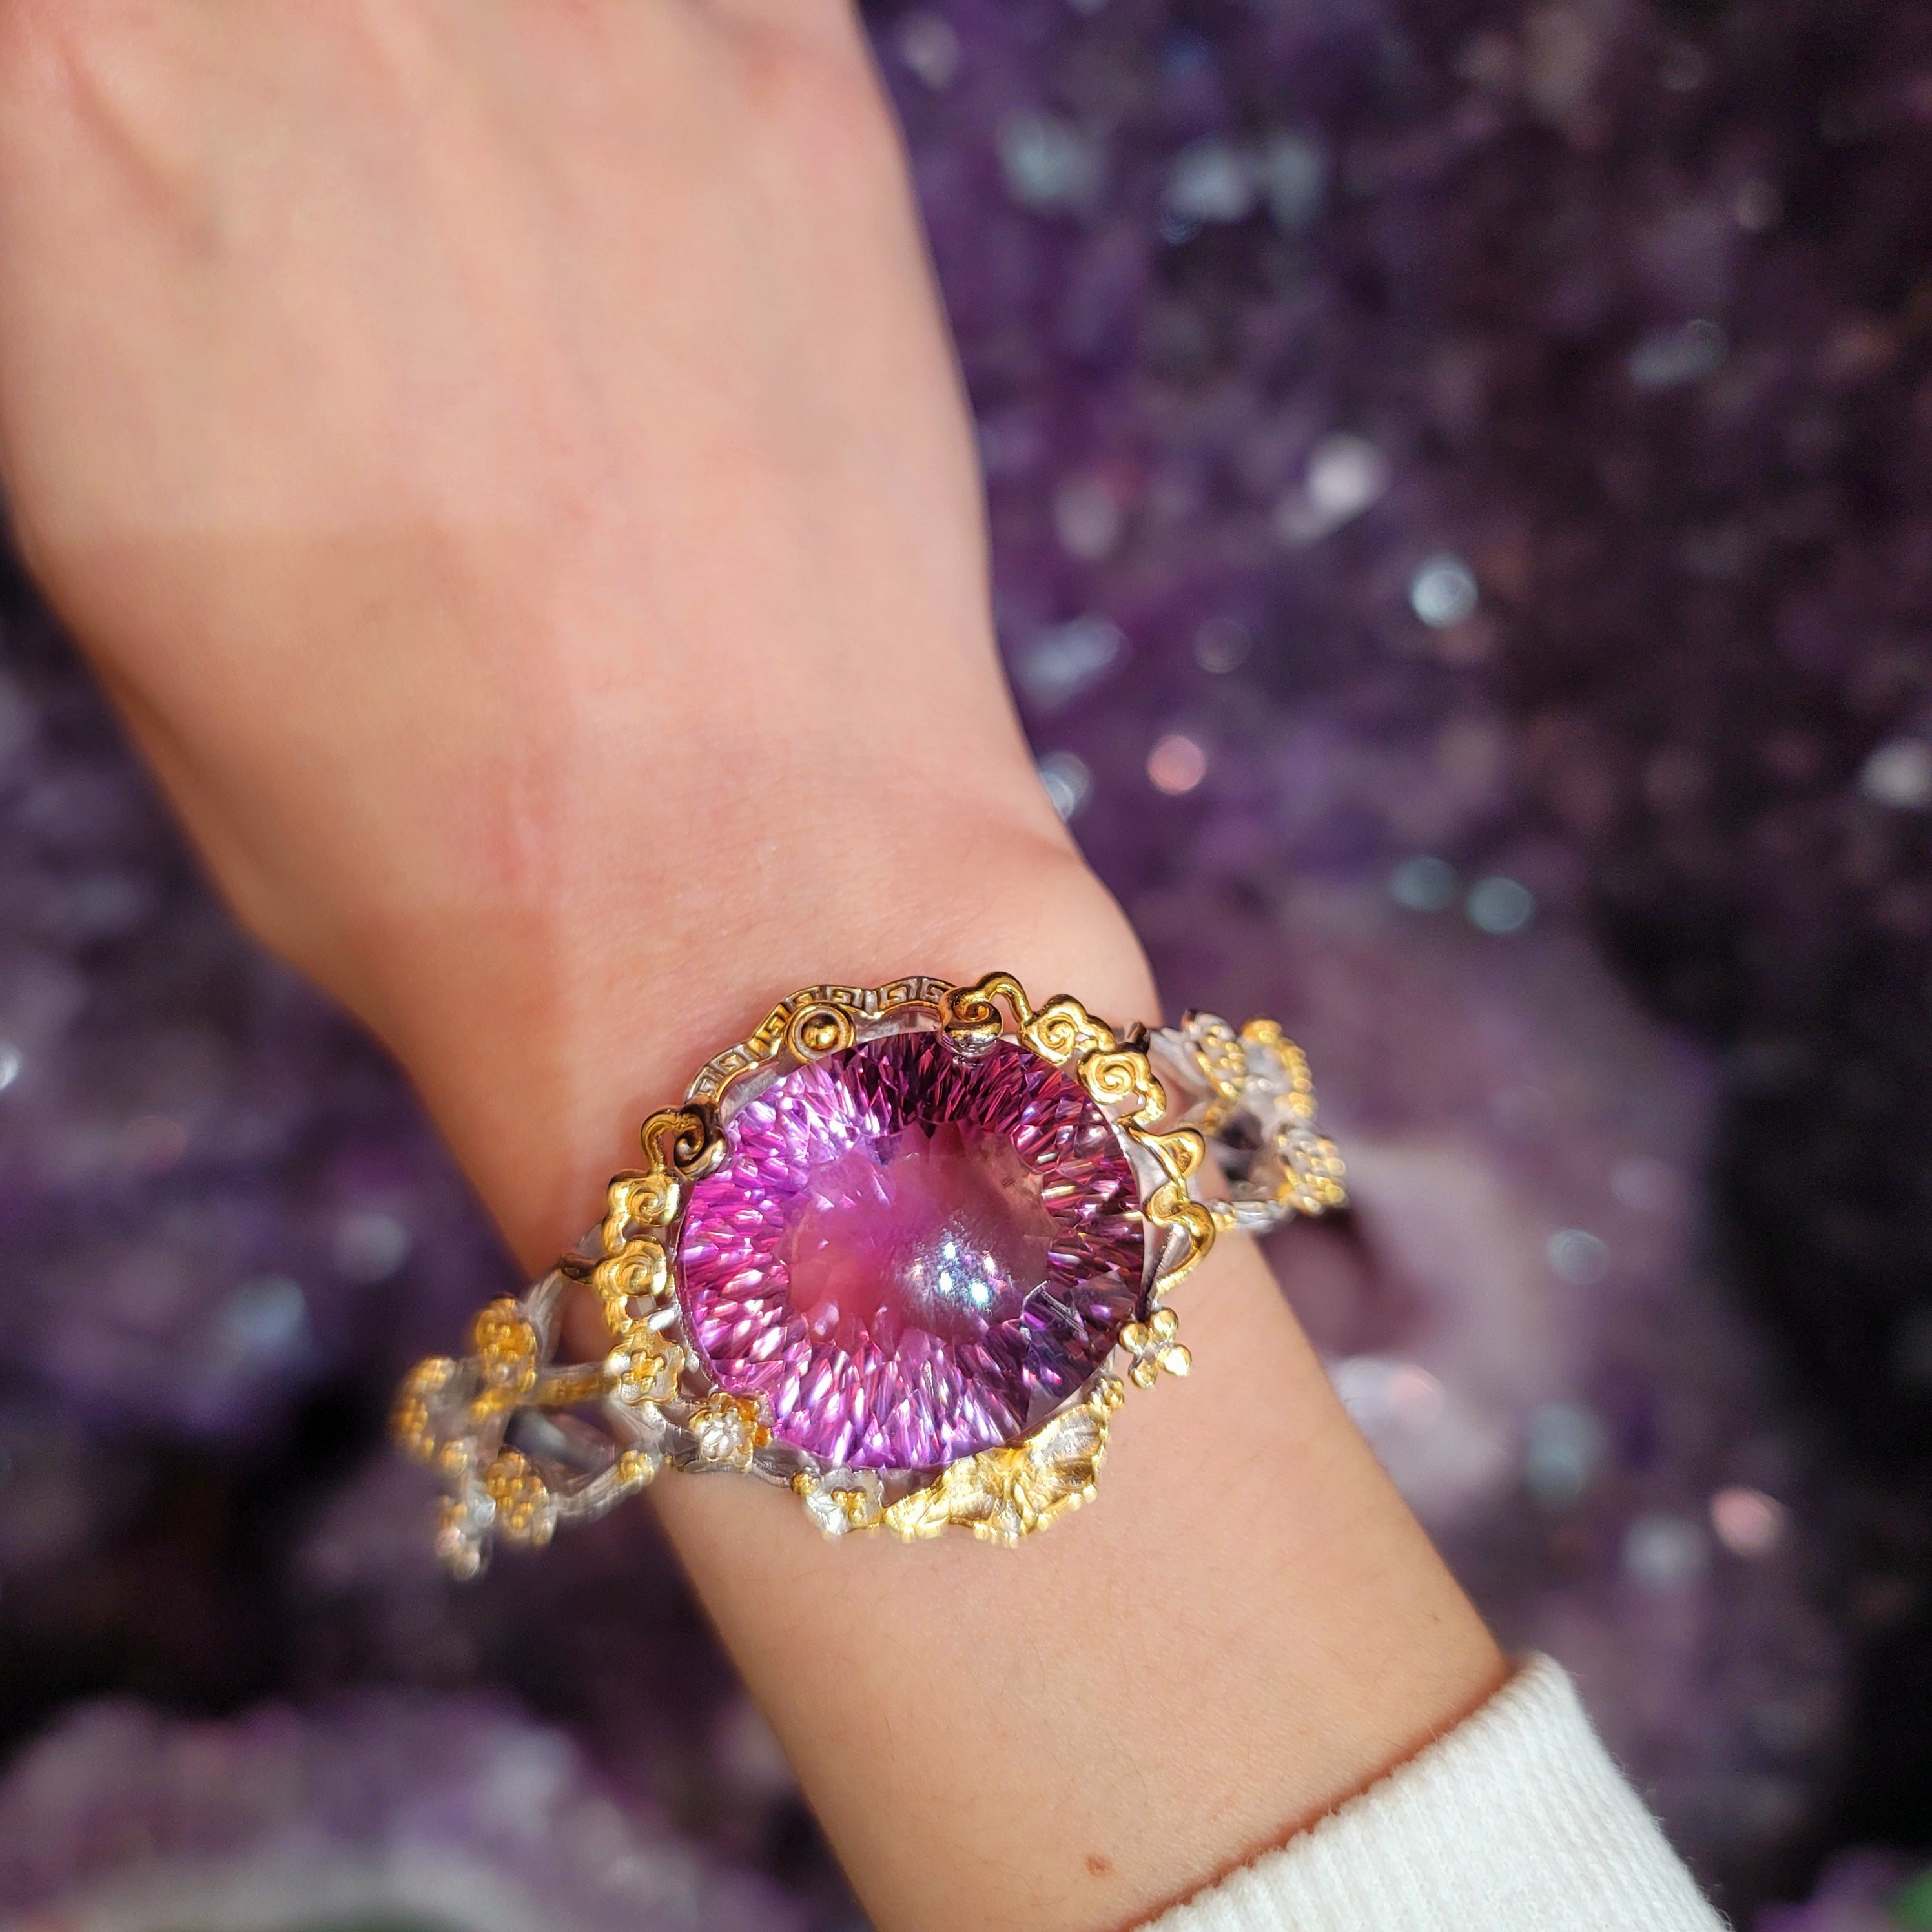 Ametrine Enchanted Cuff Bracelet for Empowerment, Harmony and Transformation into your Dream Life